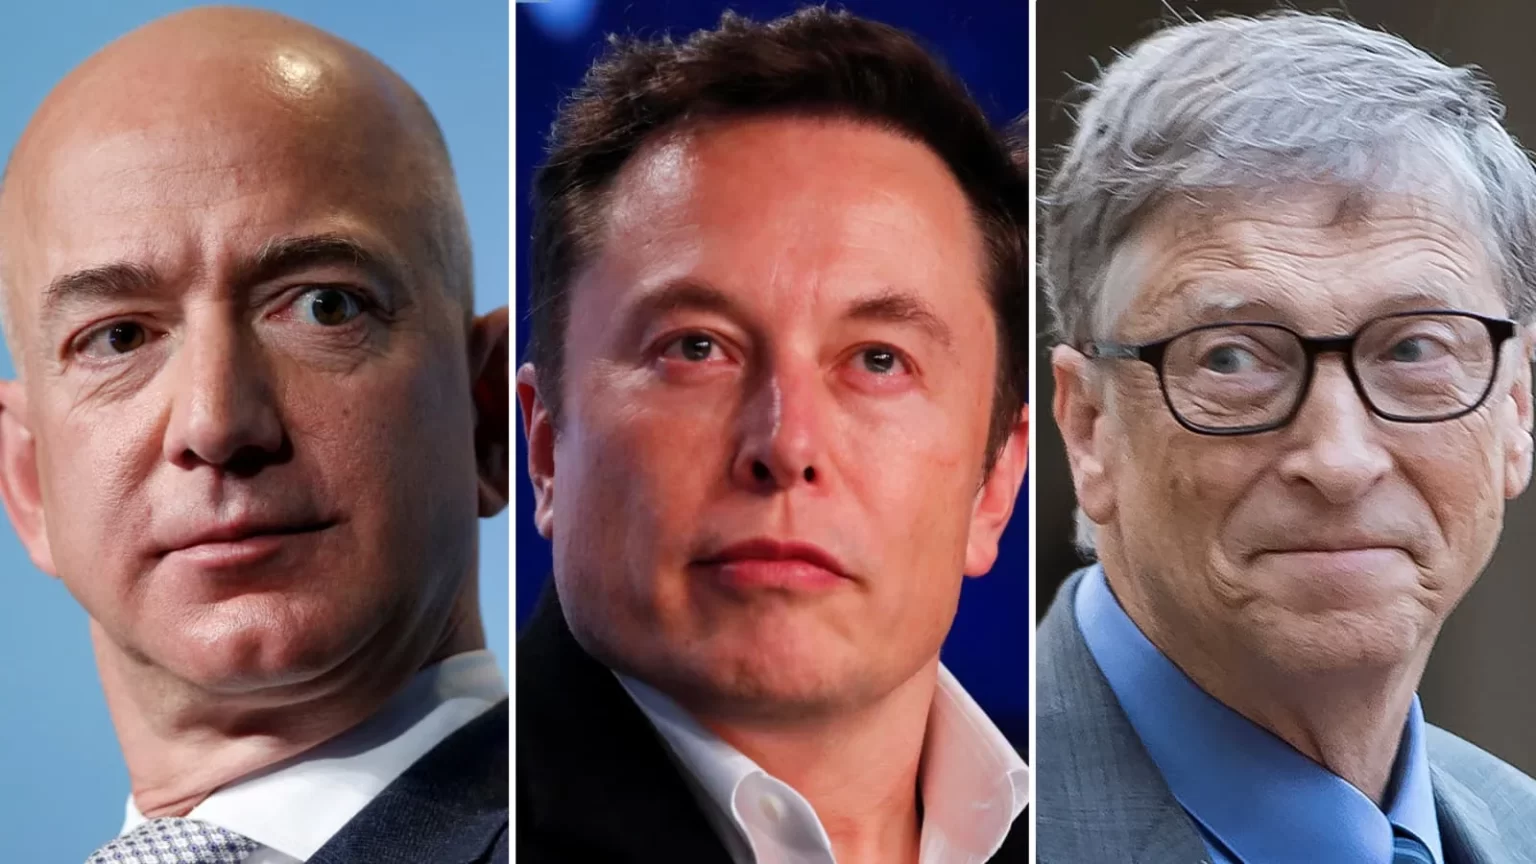 image cnbcfm com 106867482 1618322403002 Untitled 1 1536x864 - Why Elon Musk, Bill Gates, and Jeff Bezos are investing in biotech?